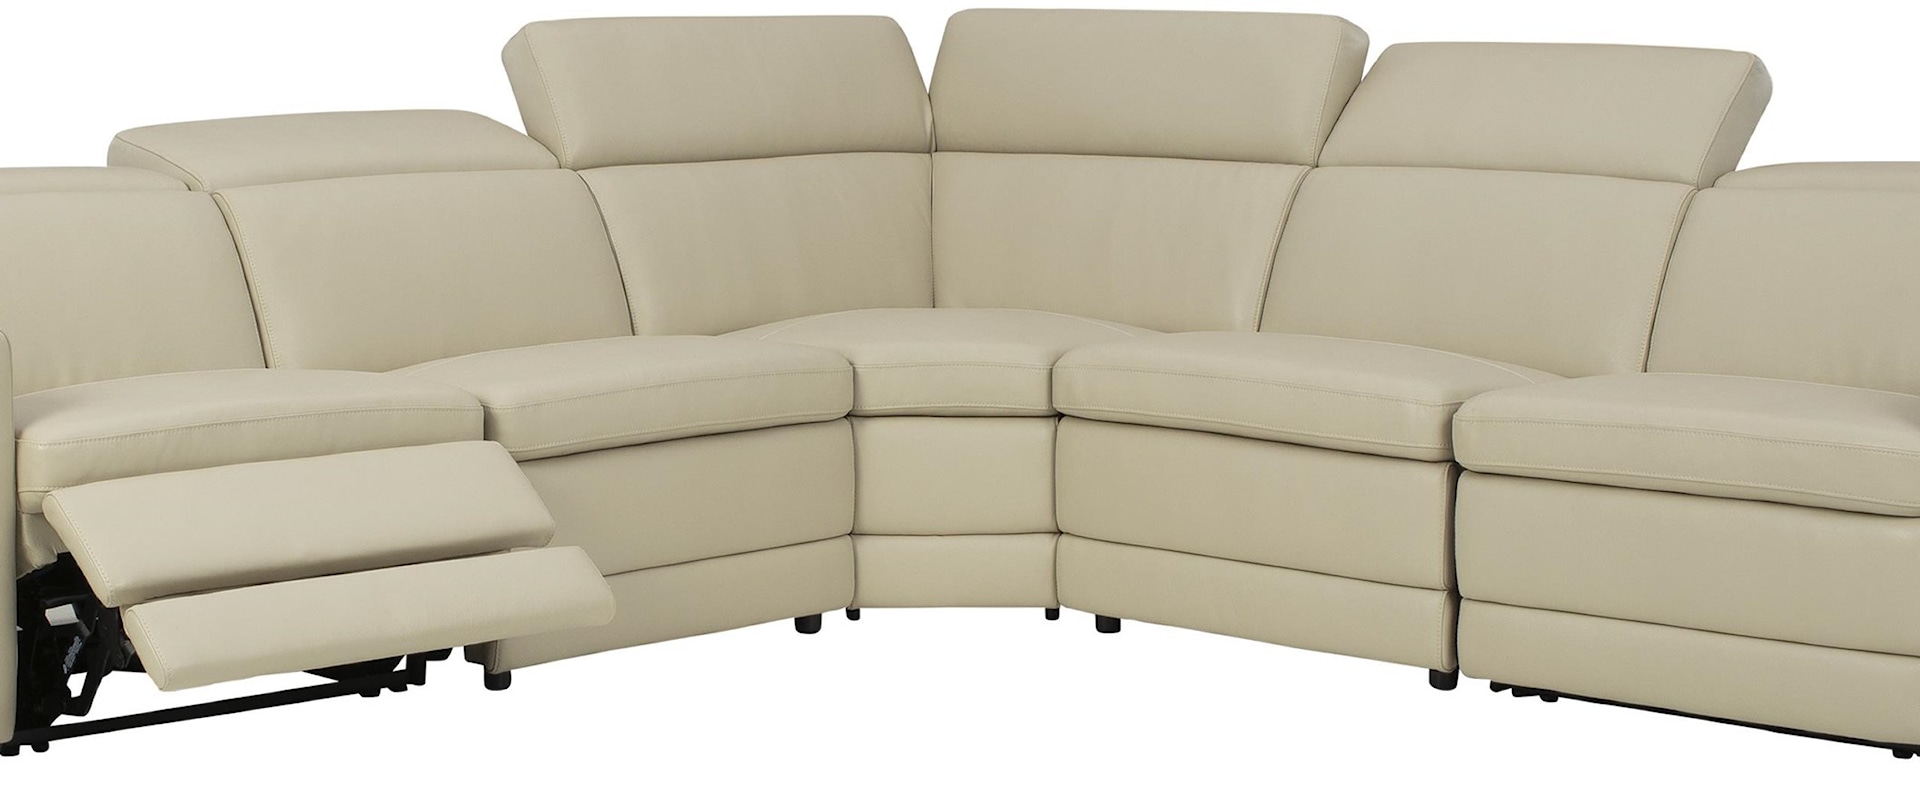 6 Piece Power Reclining Sectional Sofa and Power Recliner Set